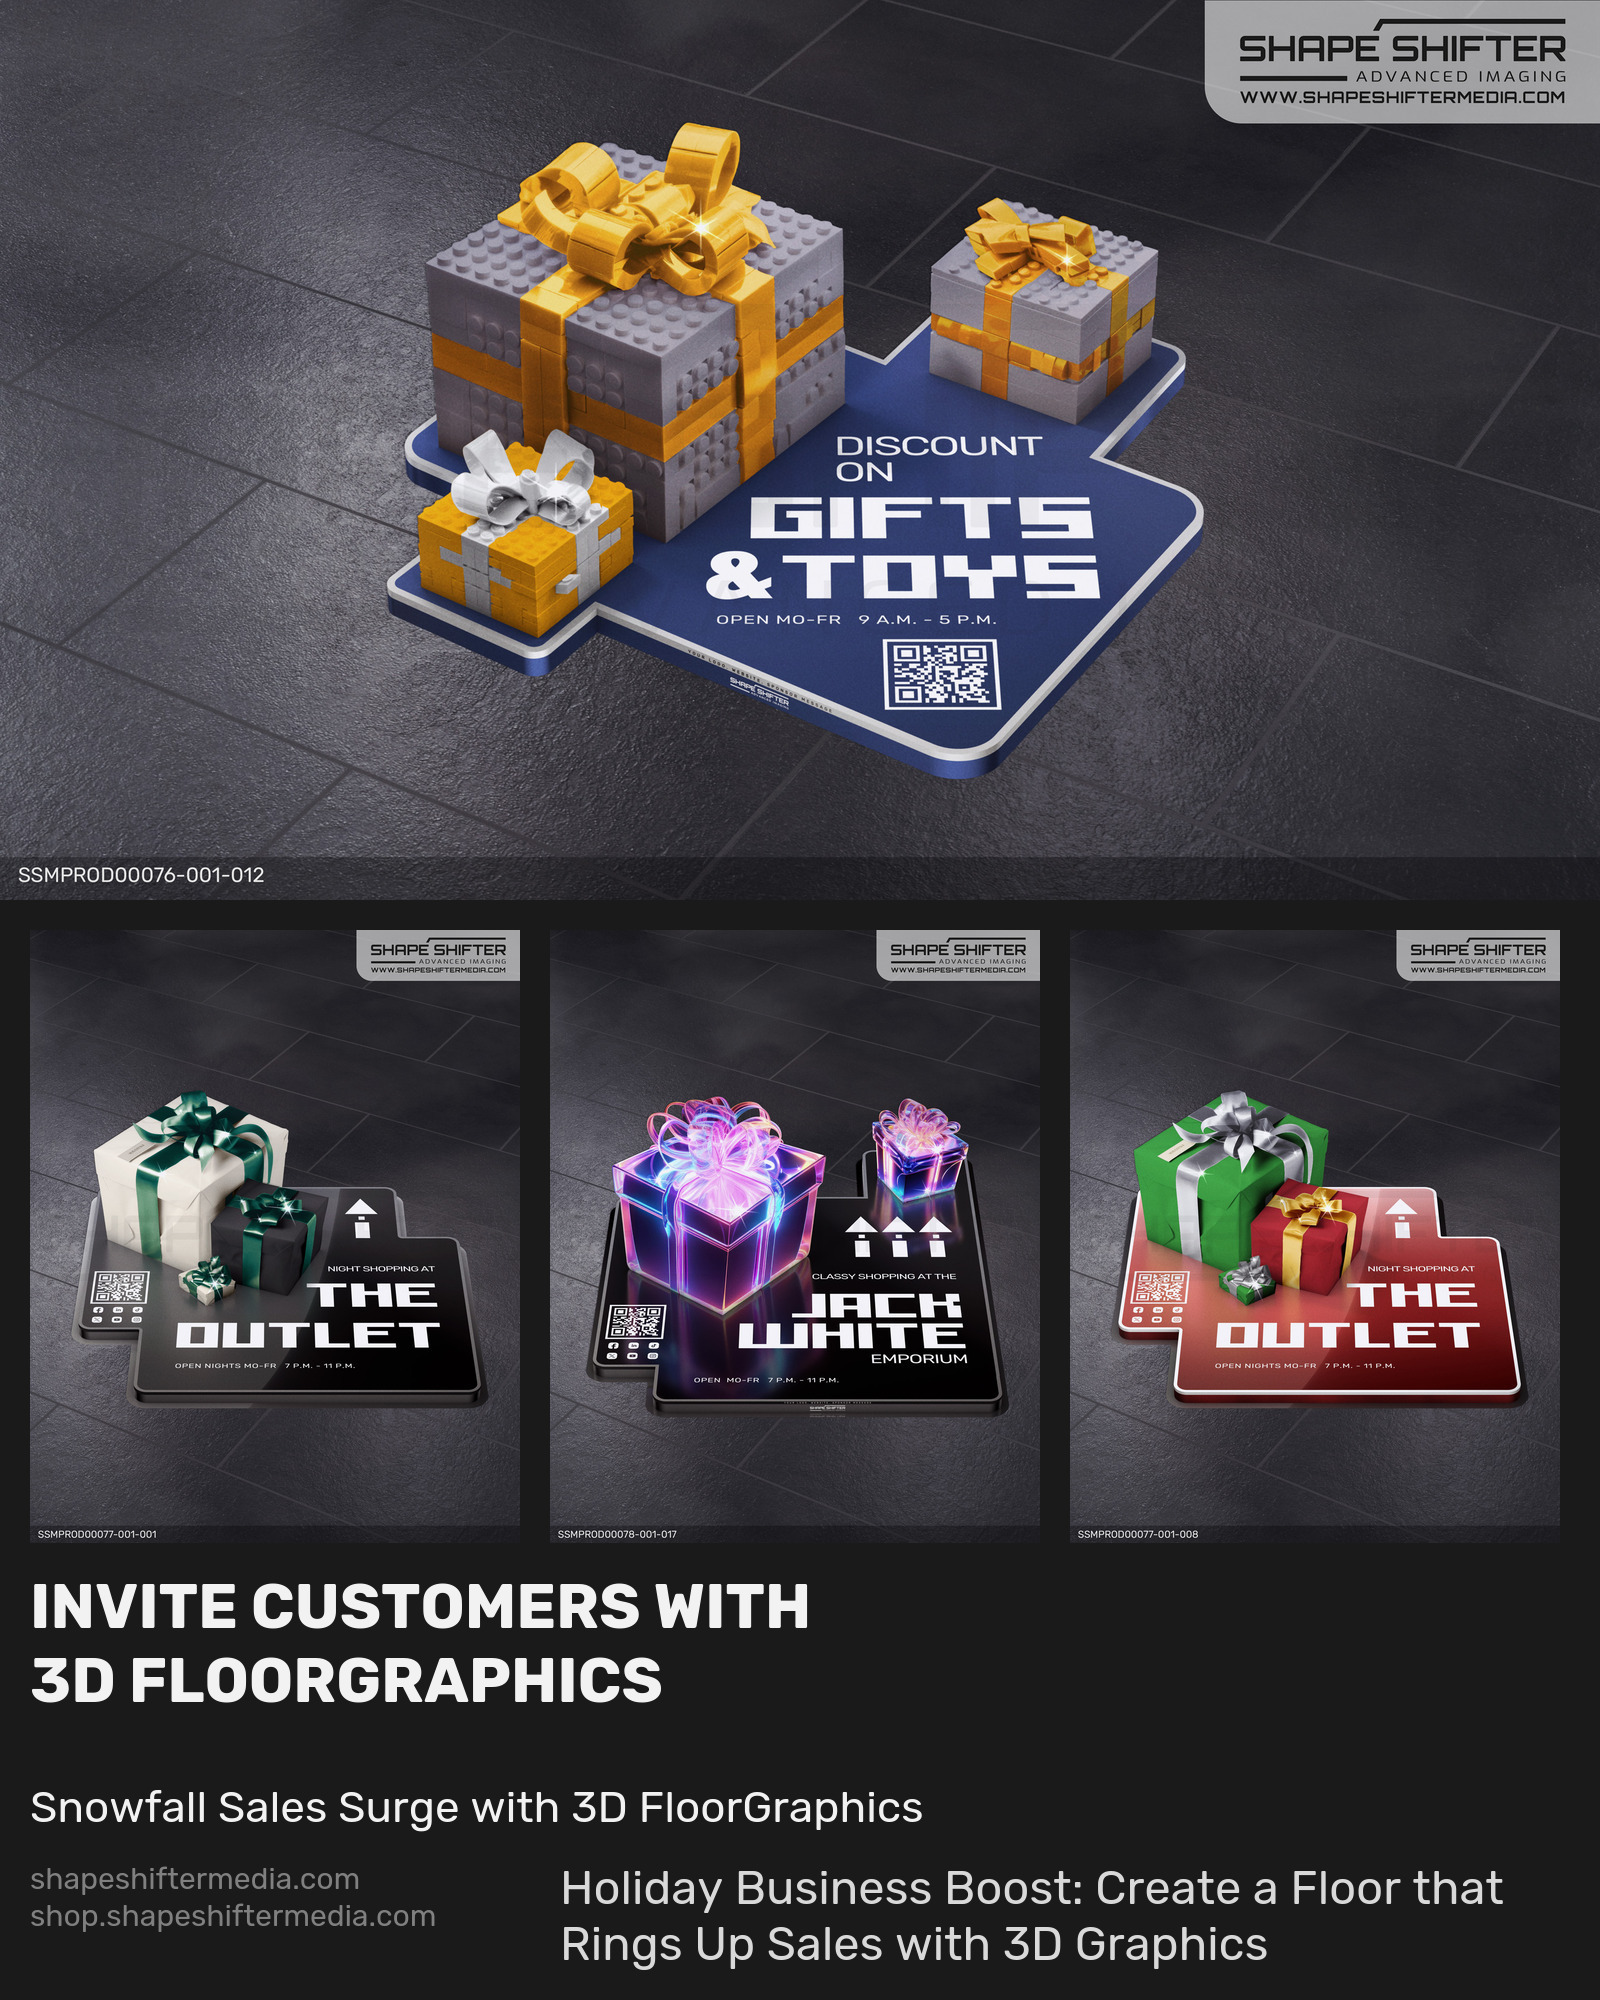 Shapeshifter Media on X:  Holiday Business Boost:  Create a Floor that Rings Up #Sales with 3D Graphics #EndOfYearCelebration  #newyearseve #thanksgivingcandles #ChristmasDeals #HolidaySavings #Shopping  #ThanksgivingDinner